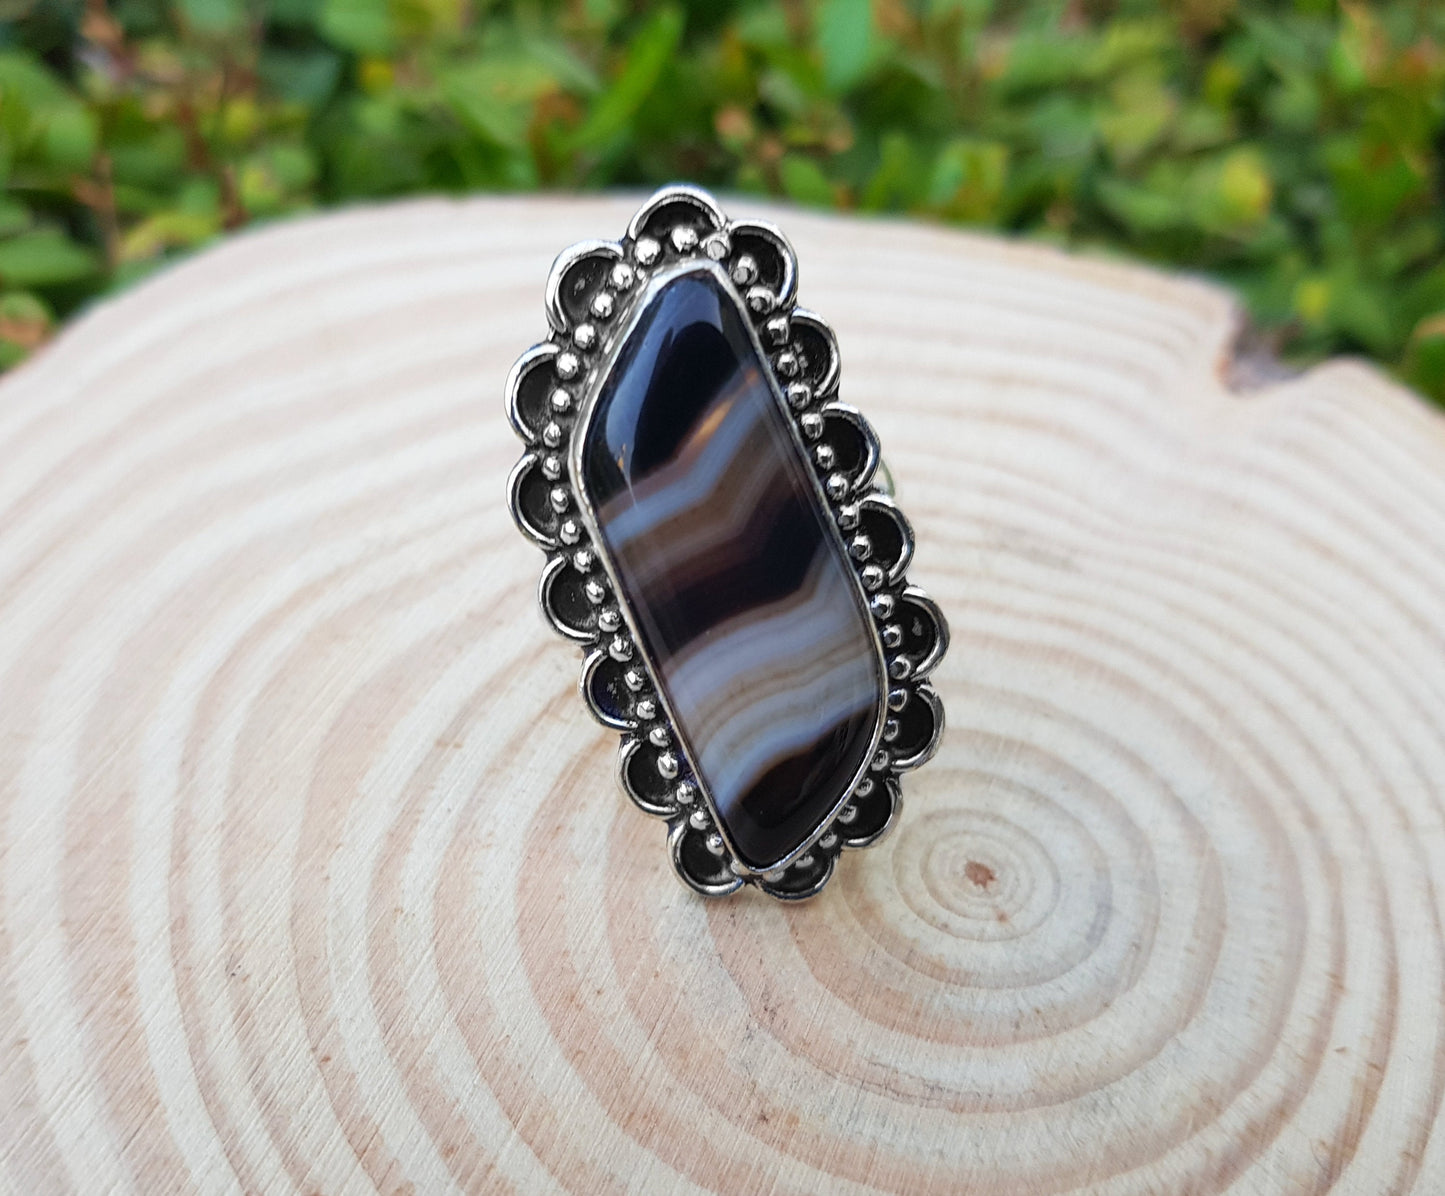 Botswana Agate Ring In Sterling Silver Size US 8 1/4 Statement Ring One Of A Kind